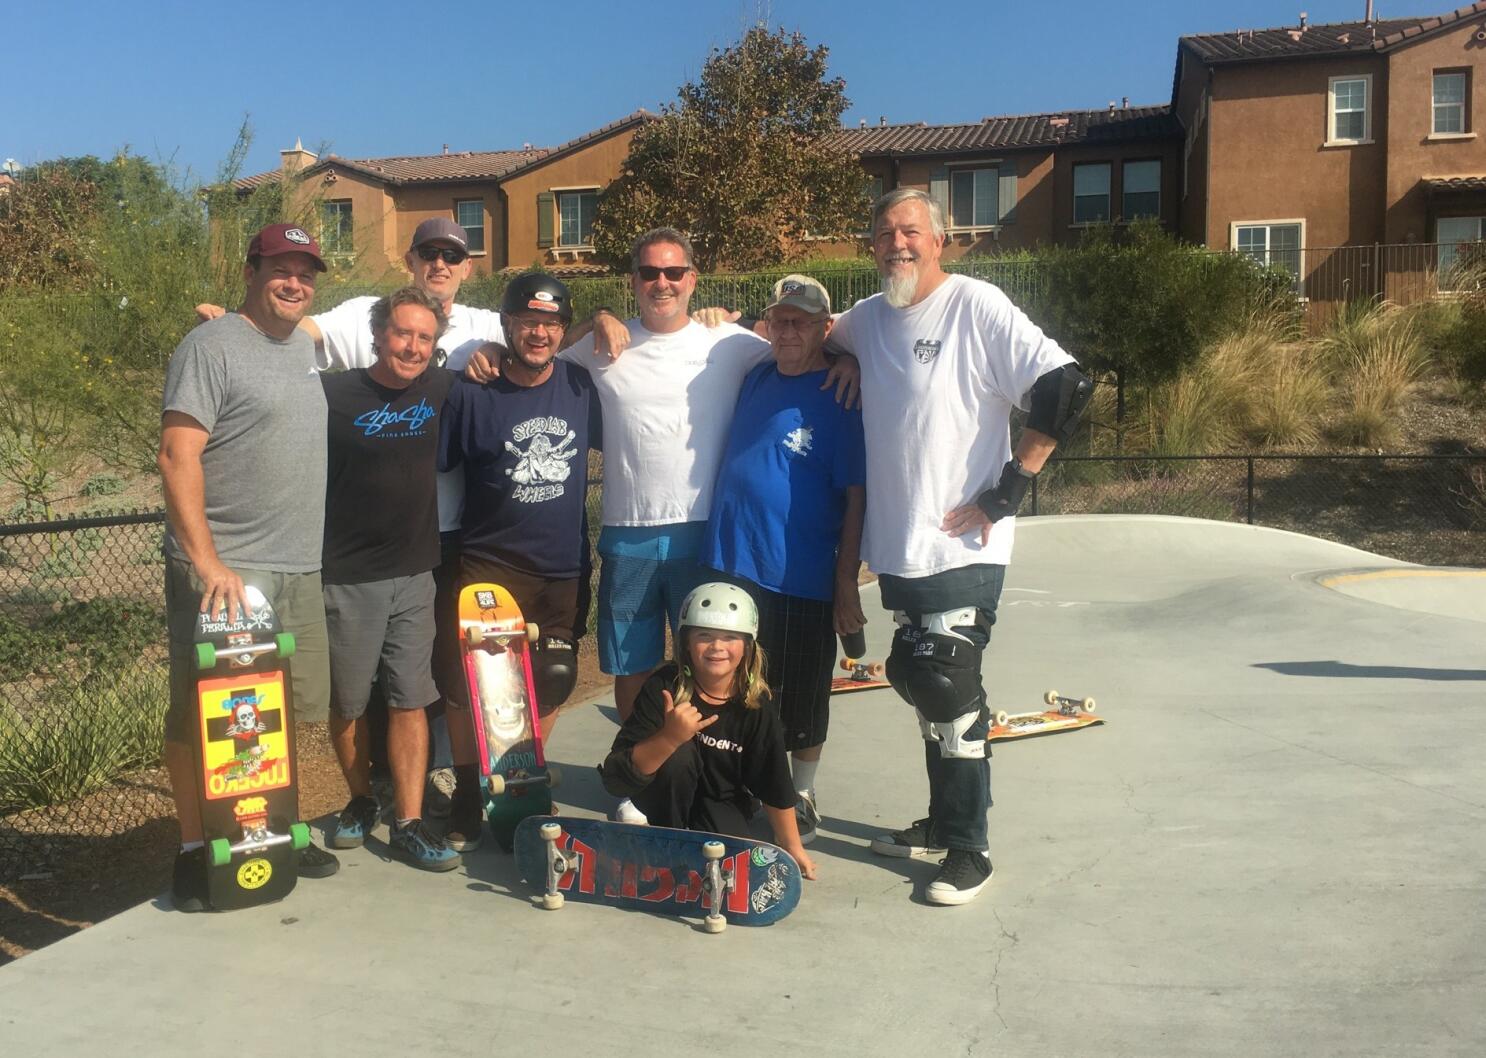 Skate Against ALS Skate-A-Thon features skateboard legends at PHR March 7 - Del Mar Times